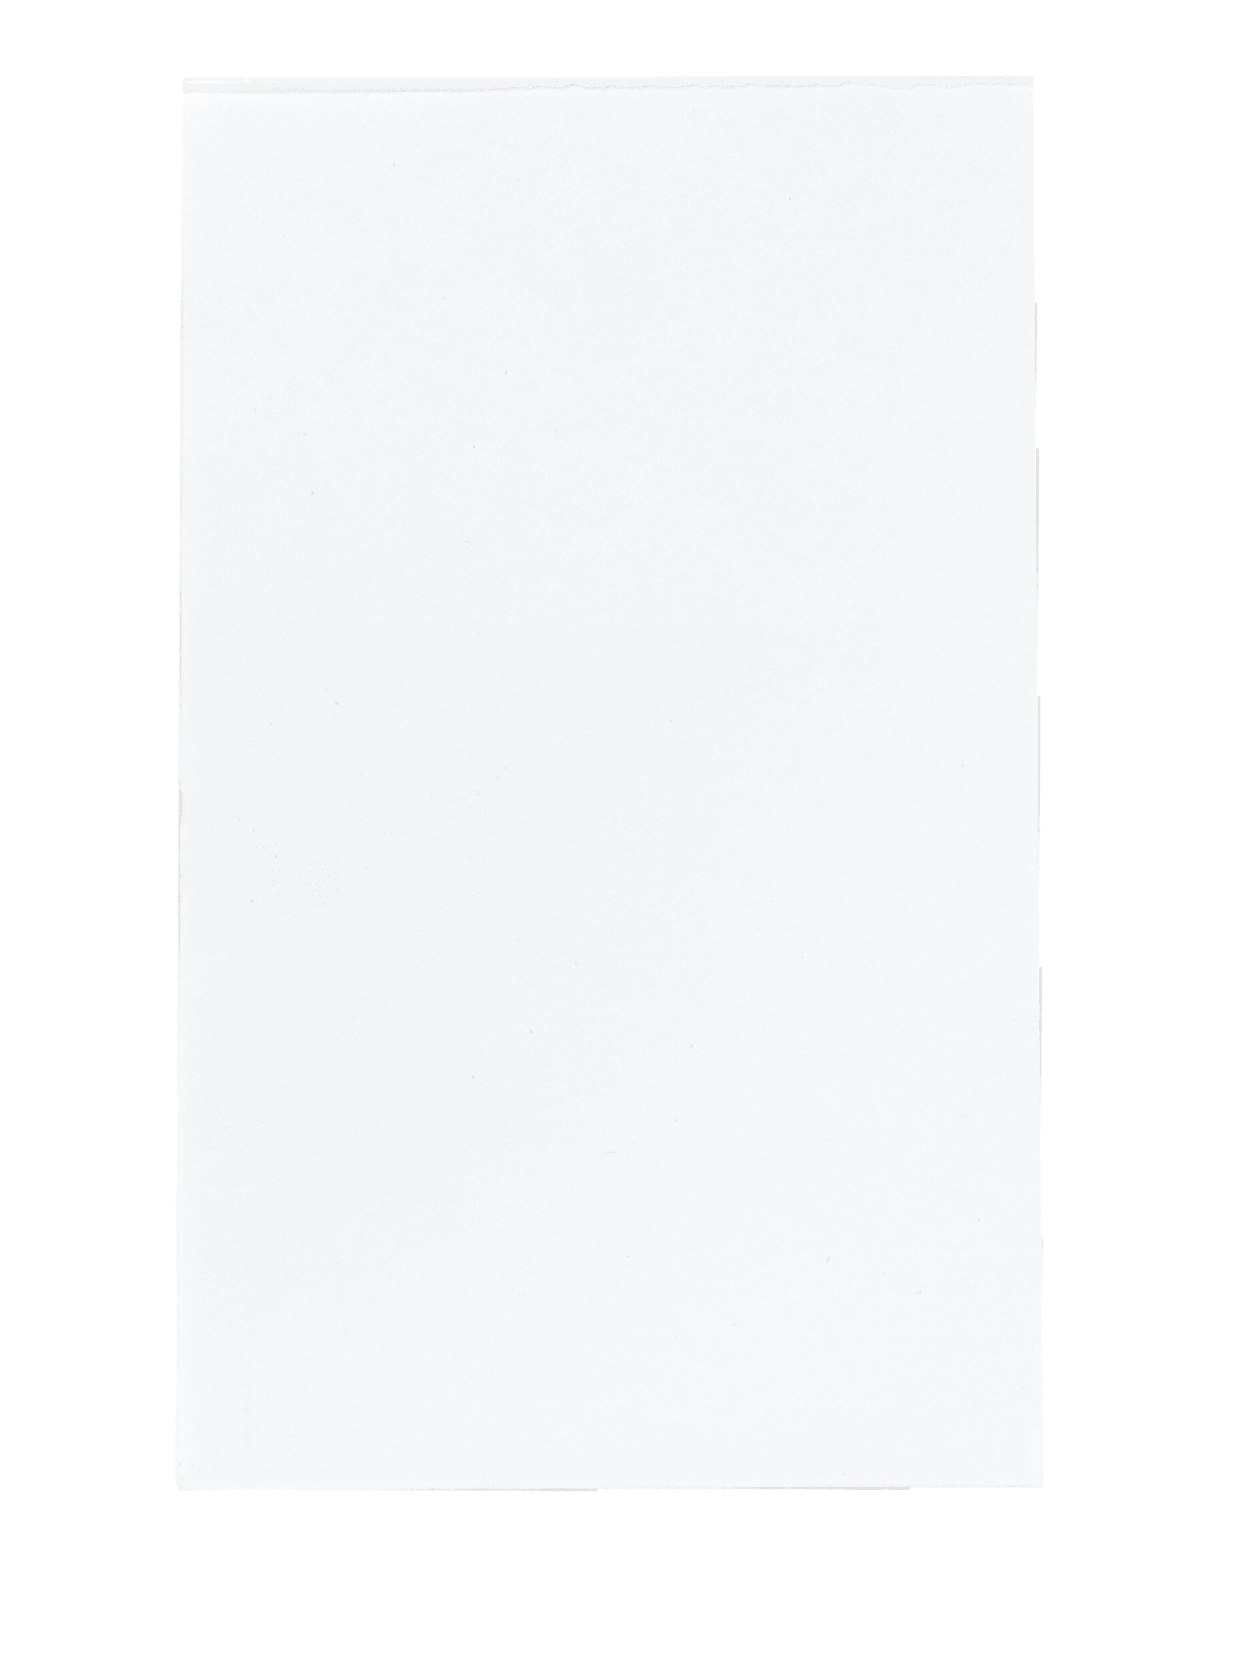 180 100-Sheet Pads//Carton for sale online White Unruled 3 x 5 Universal 35623 Bulk Scratch Pads